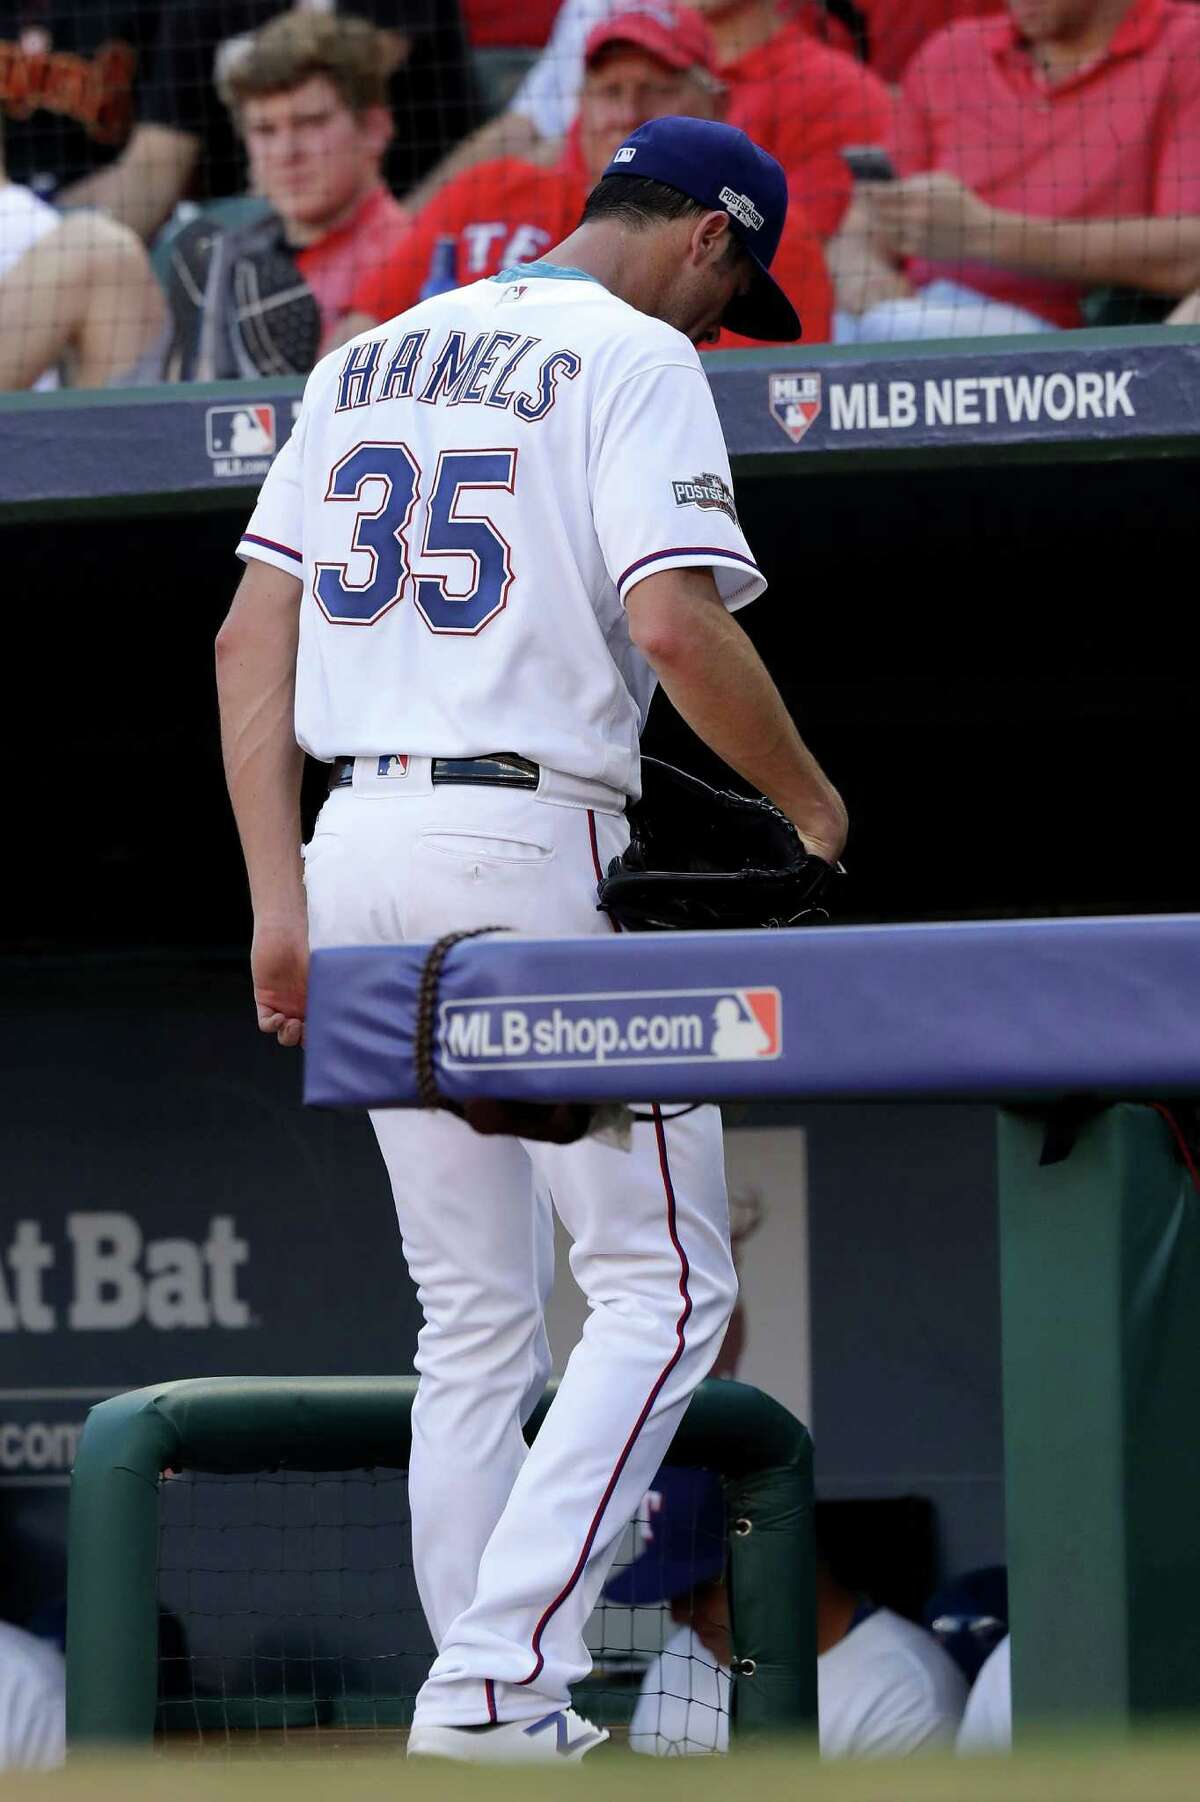 ARLINGTON, TX - OCTOBER 06: Cole Hamels #35 of the Texas Rangers walks back to the dugout after being relieved during the fourth inning in game one of the American League Divison Series against the Toronto Blue Jays at Globe Life Park in Arlington on October 6, 2016 in Arlington, Texas. (Photo by Ronald Martinez/Getty Images)